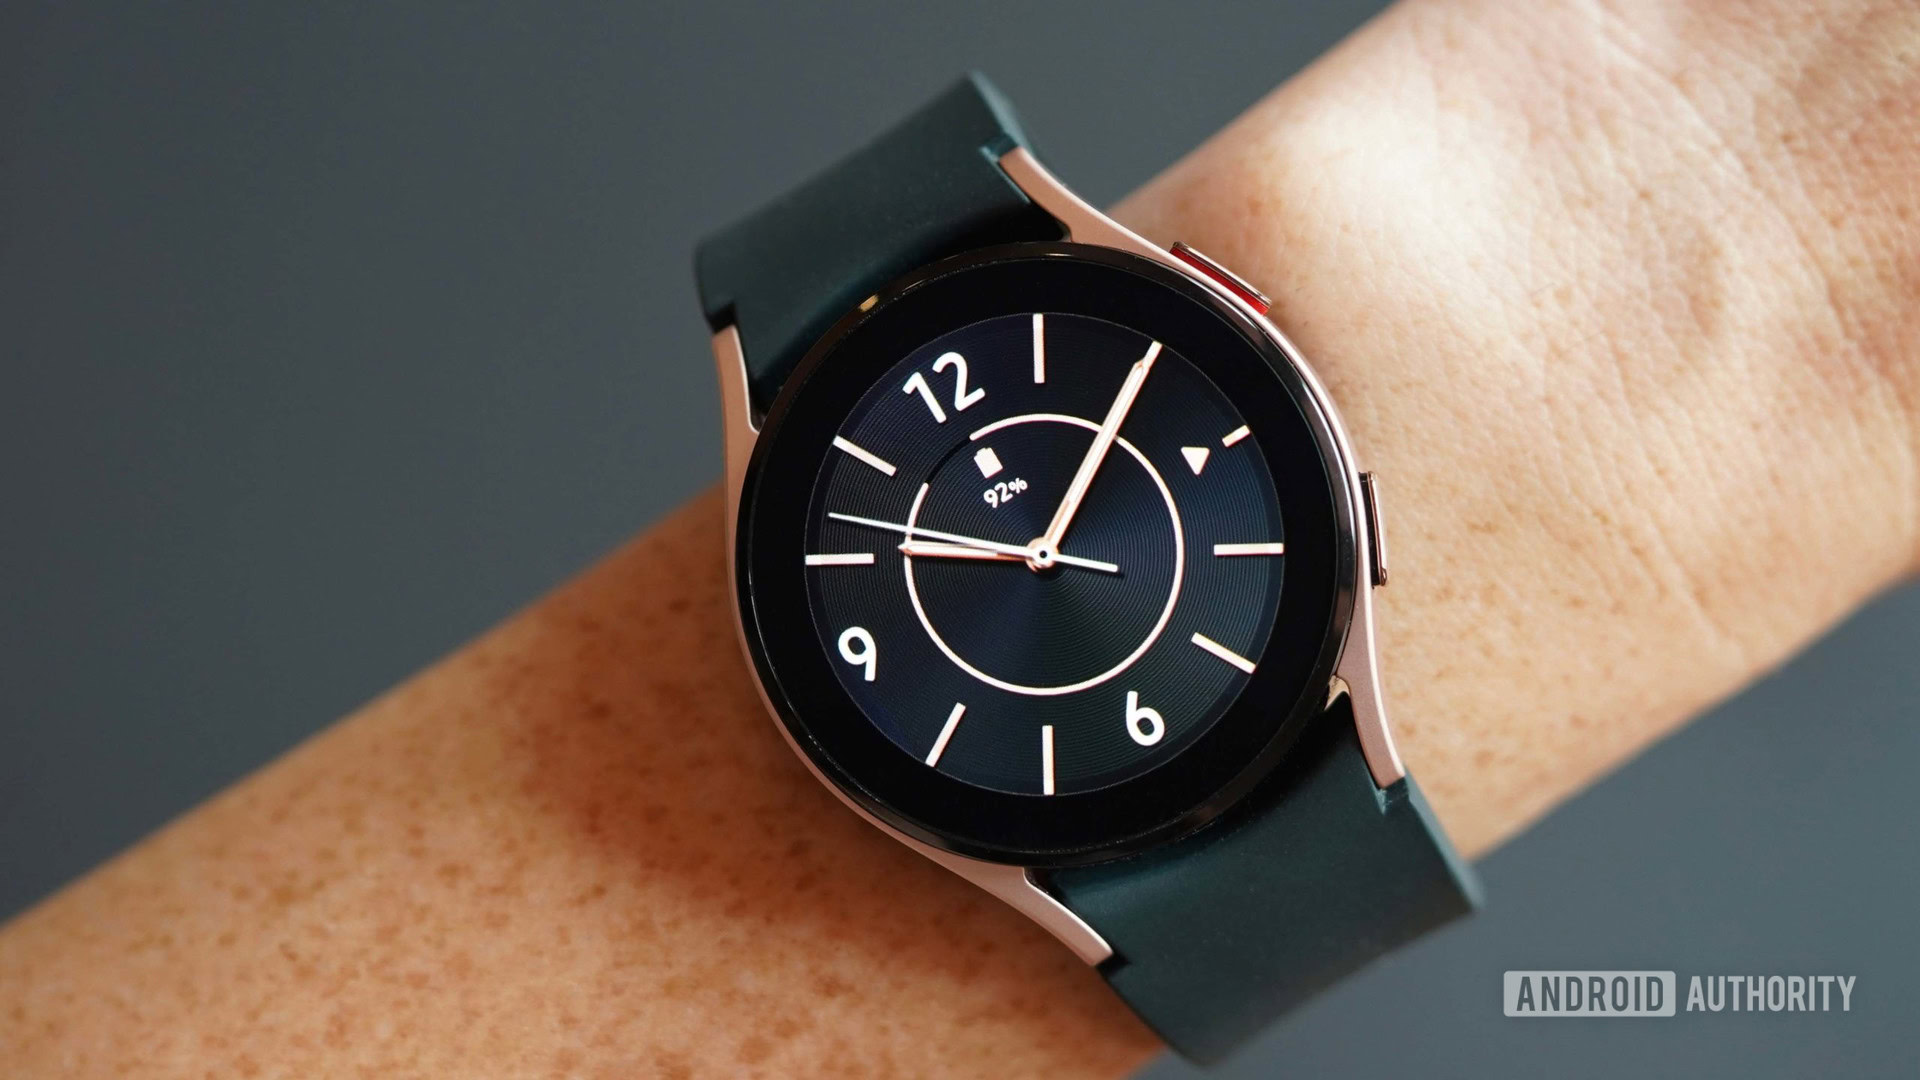 A Galaxy Watch 4 on a woman's wrist has an analog dial in black and rose gold.